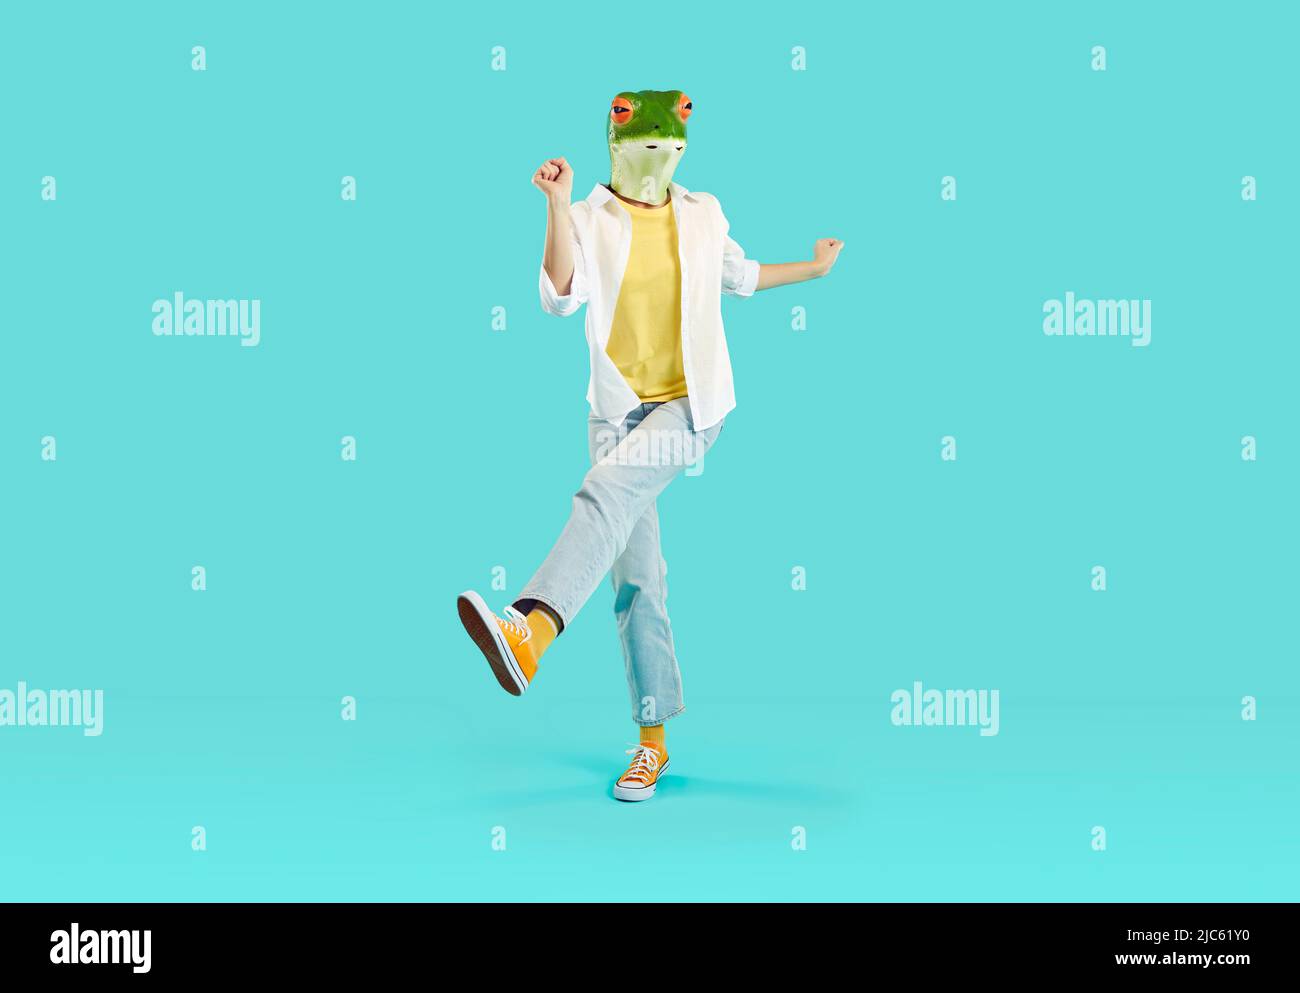 Strange woman in funny frog mask dancing and jumping isolated on turquoise background Stock Photo